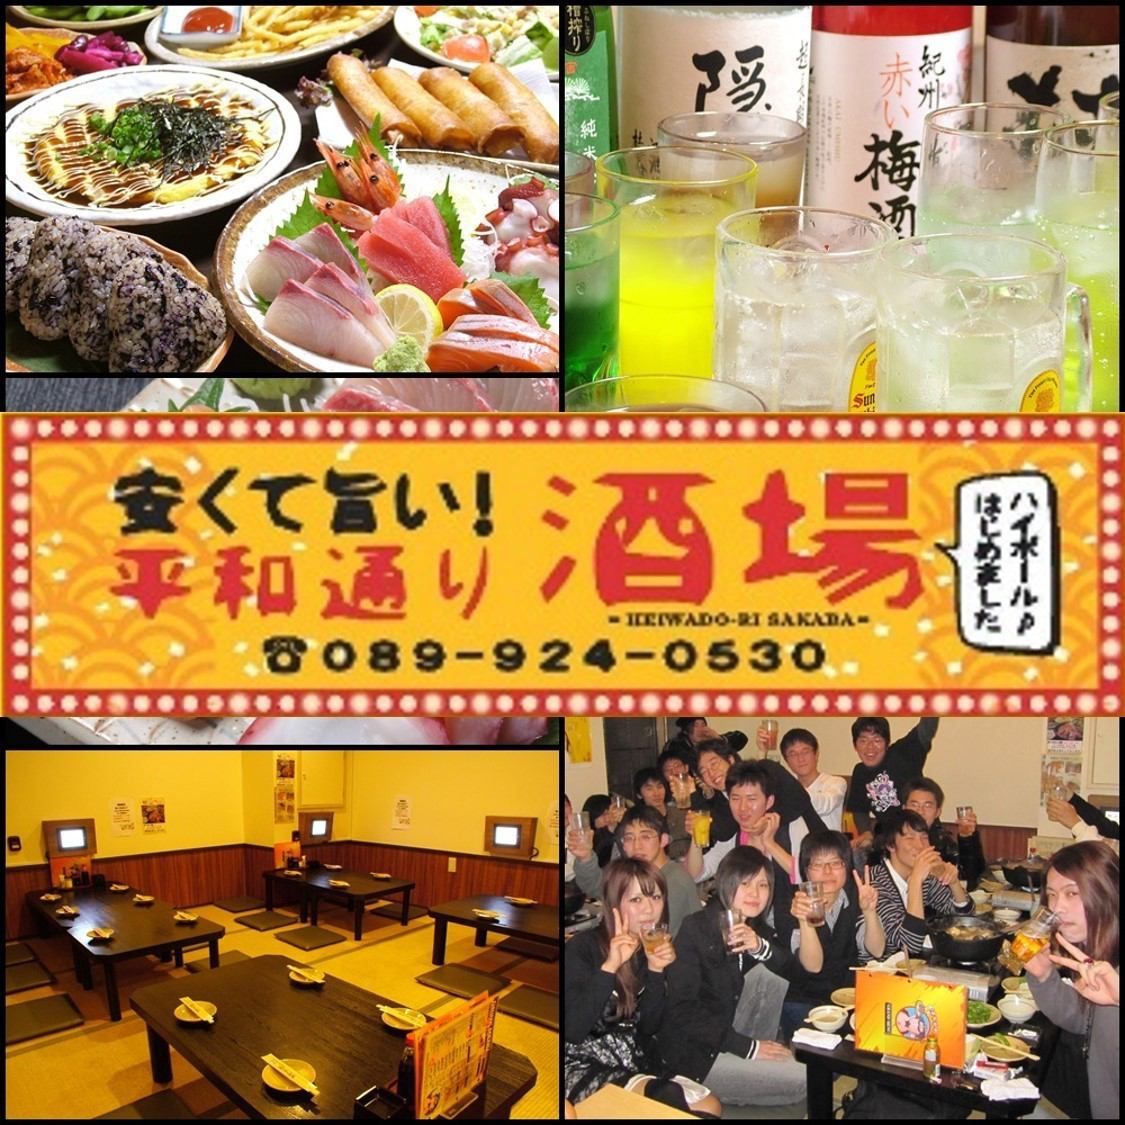 Heiwa Dori Sakaba! All-you-can-eat and drink including sashimi for 3,300 yen is a great deal!